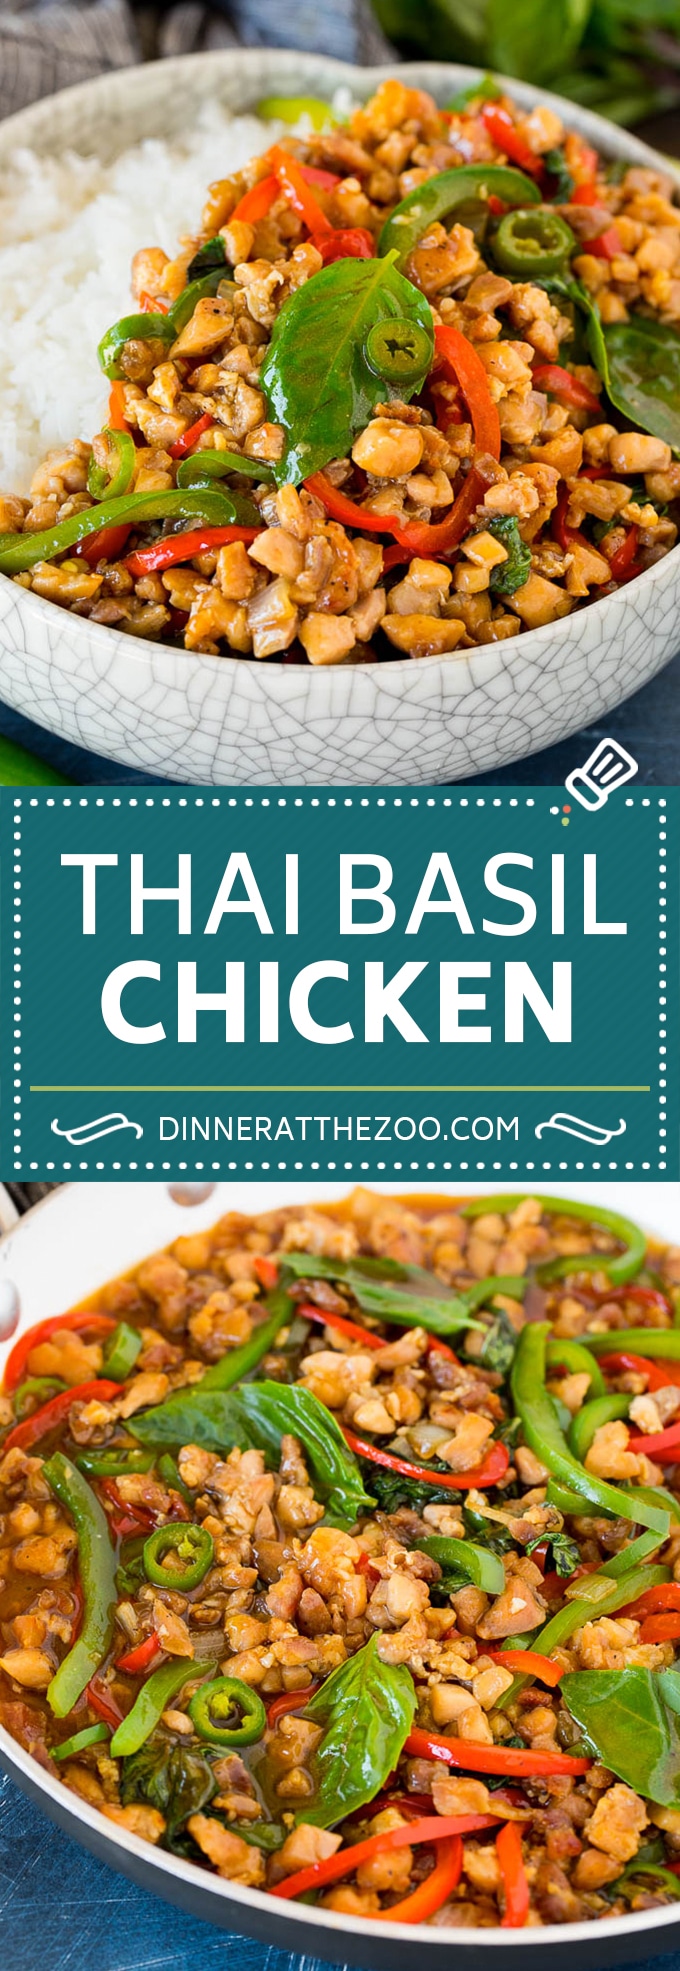 This Thai basil chicken is finely diced chicken that is stir fried with bell peppers, shallots and fresh basil leaves, all in a savory sauce.